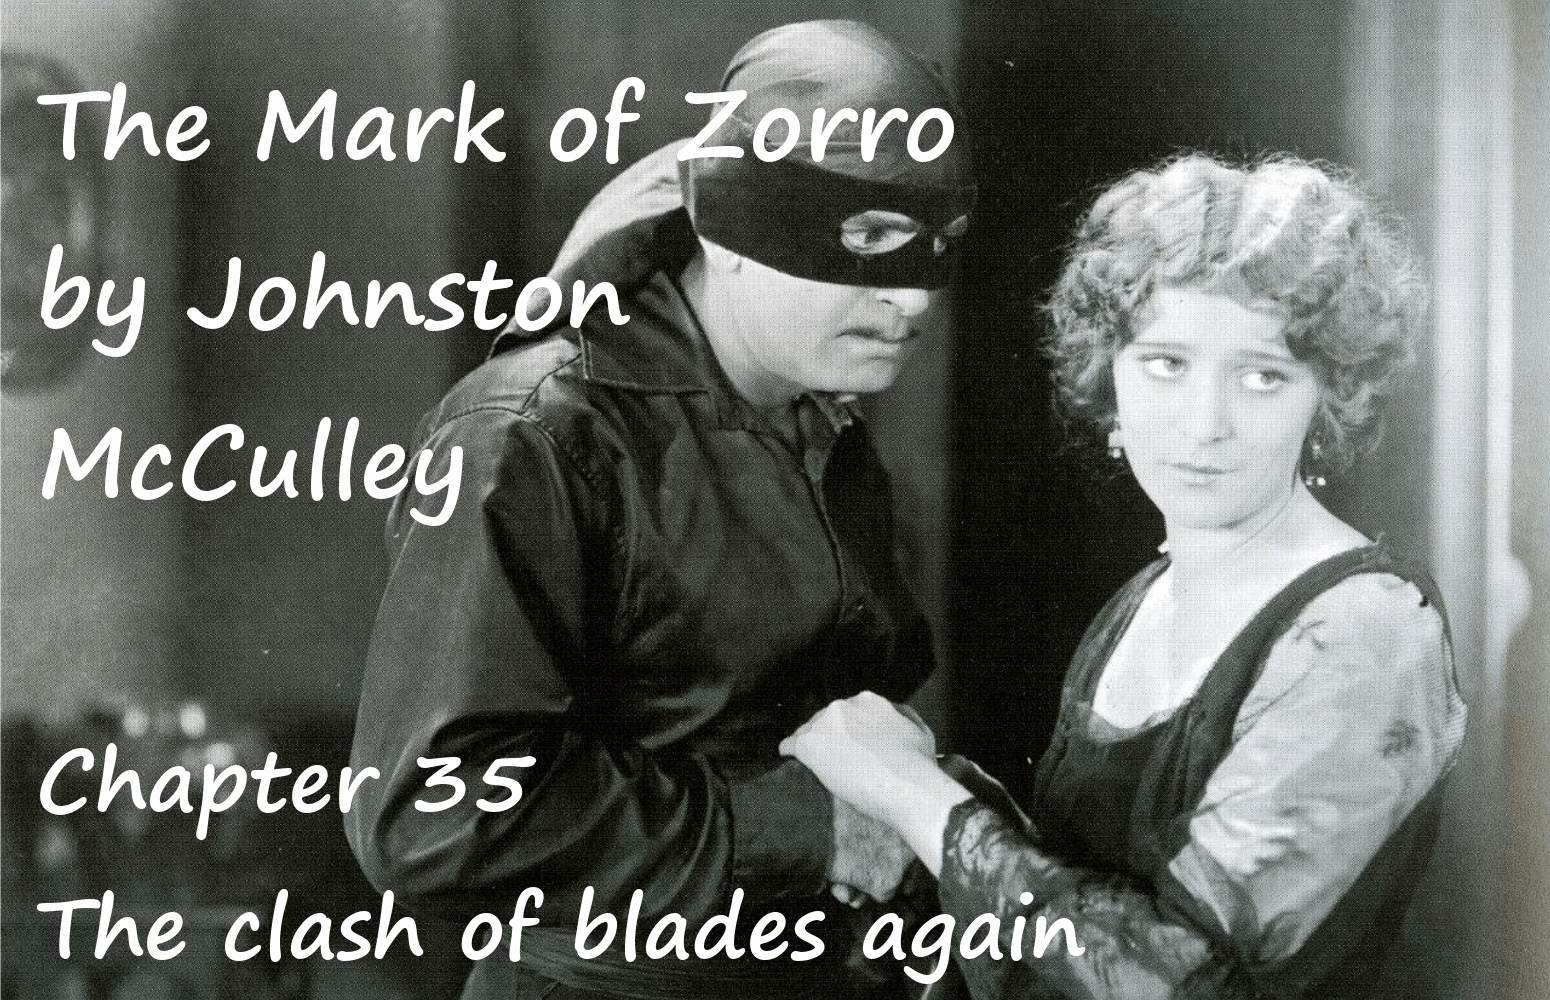 The Mark of Zorro chapter 35 The clash of blades again by Johnston McCulley